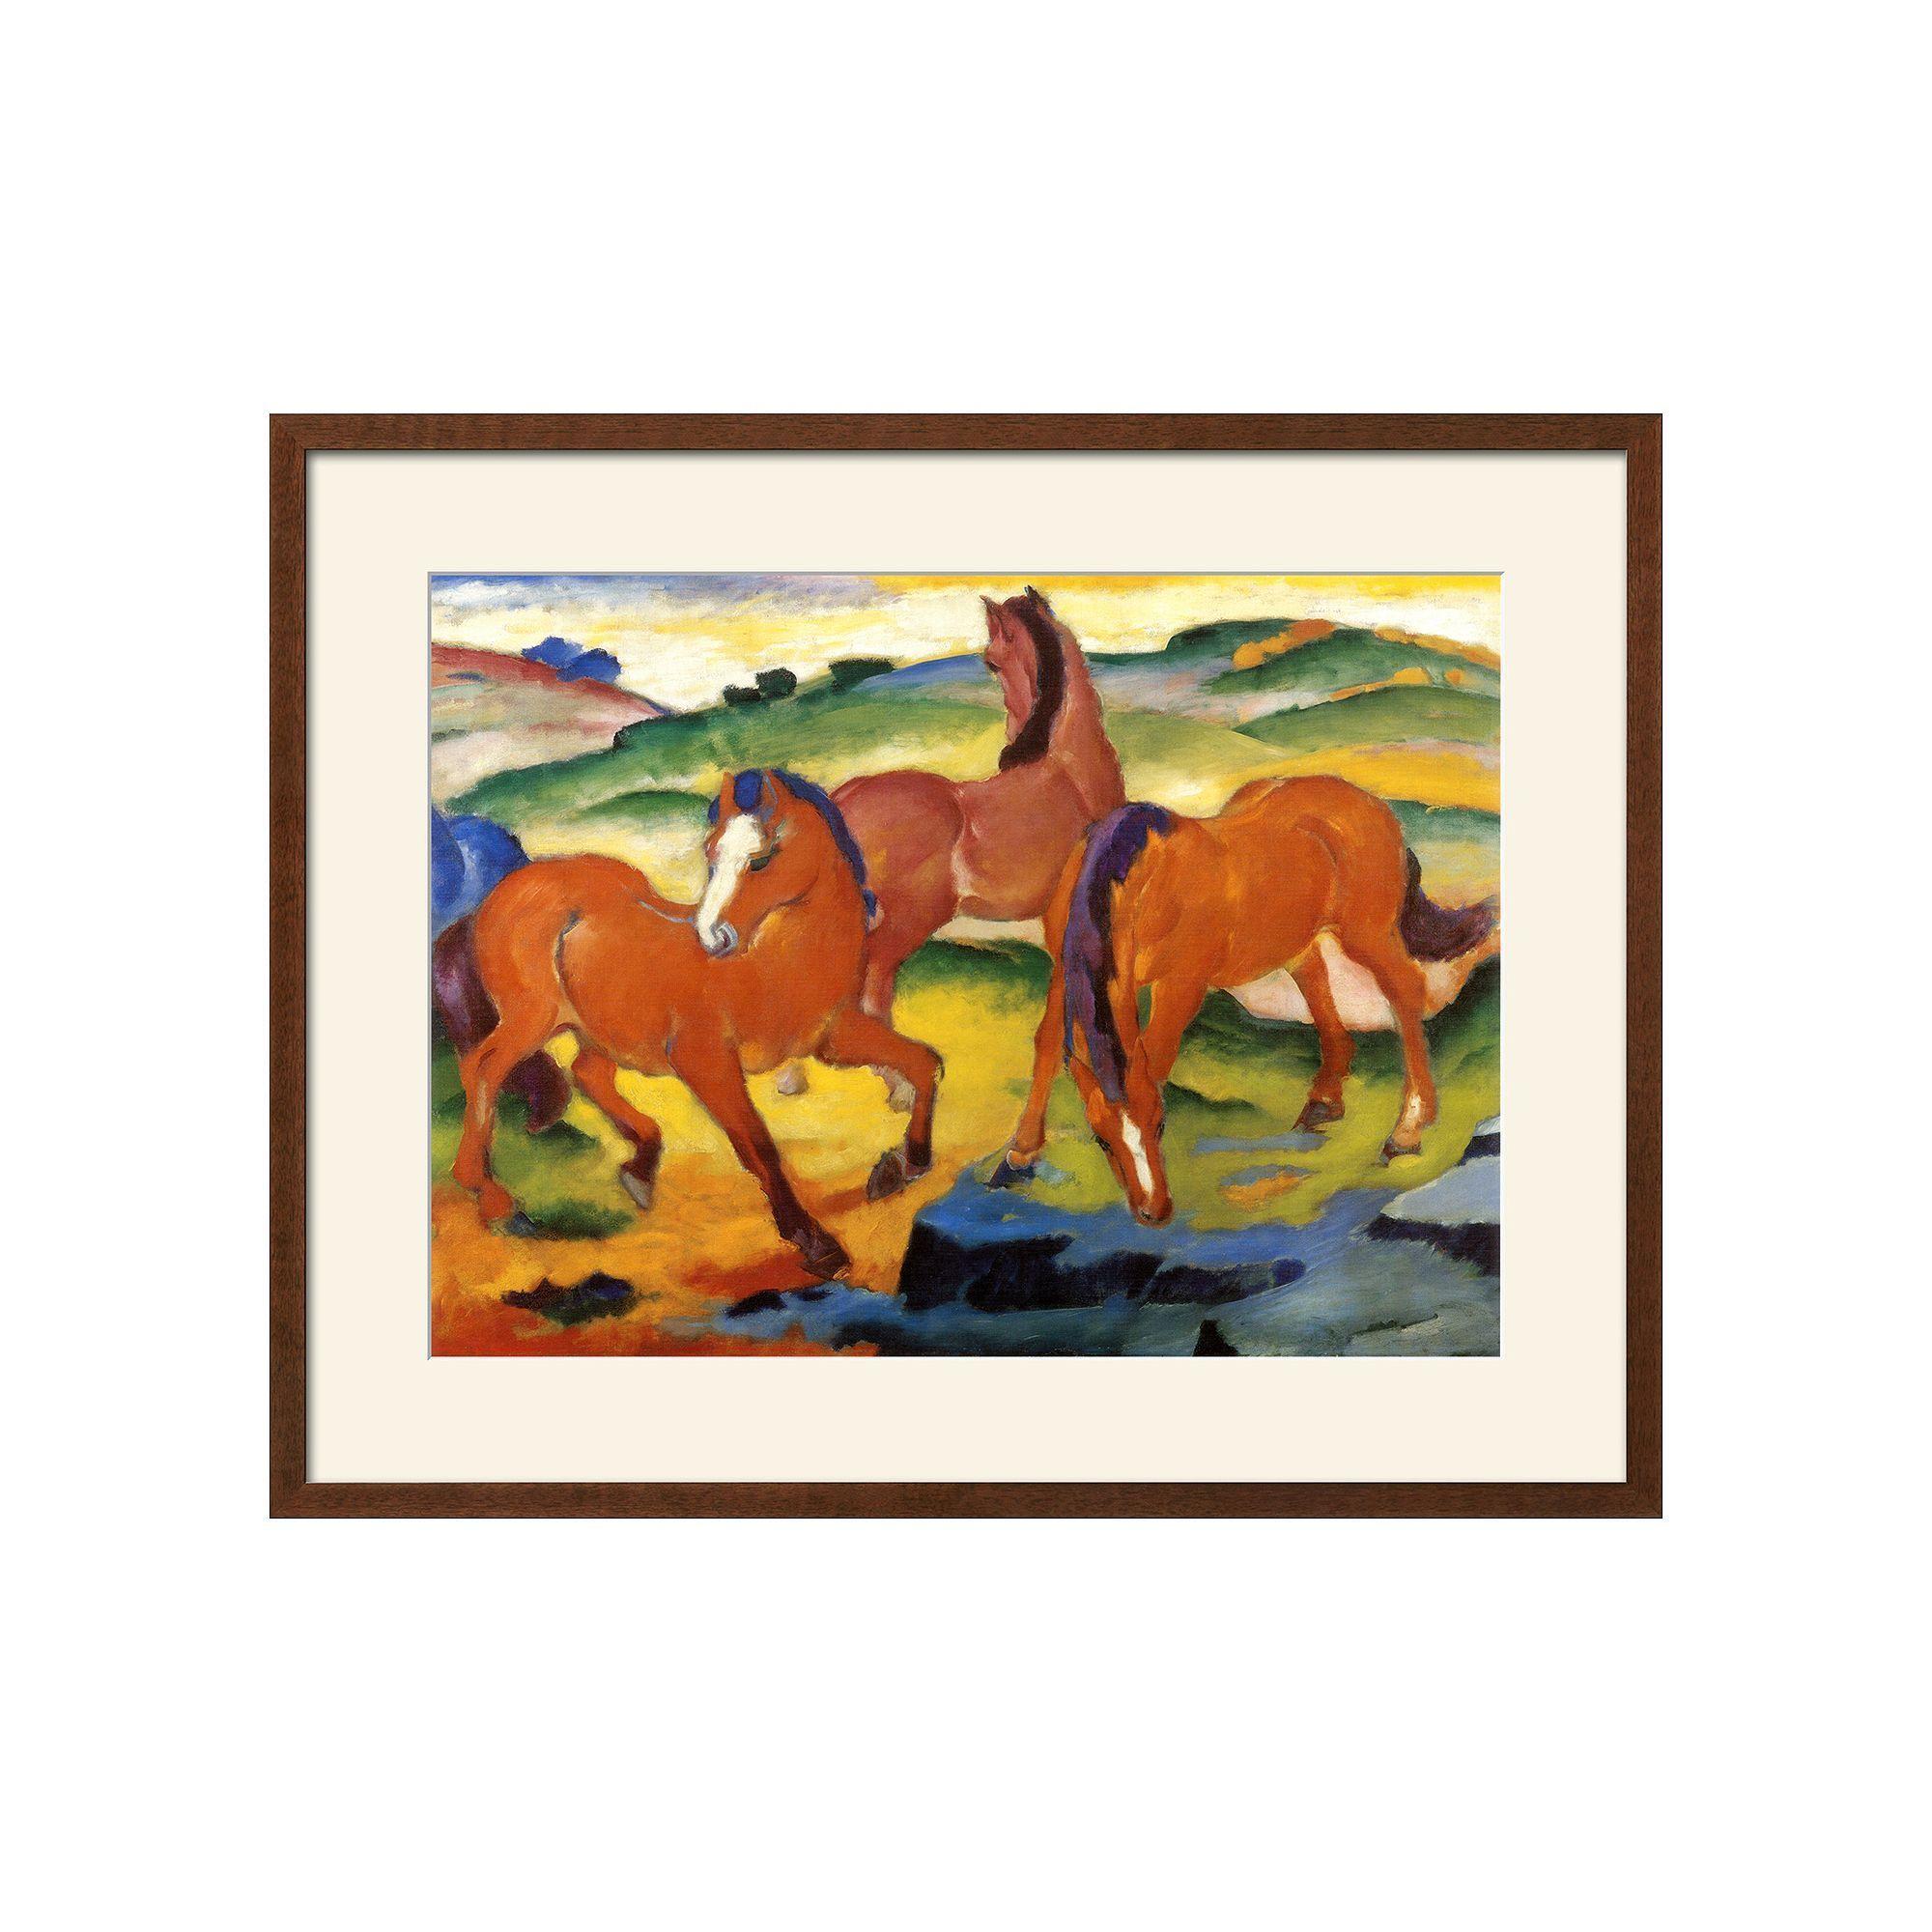 Blue Orange Red Horse Logo - Art.com The Large Red Horses 1911 Framed Wall Art. Products